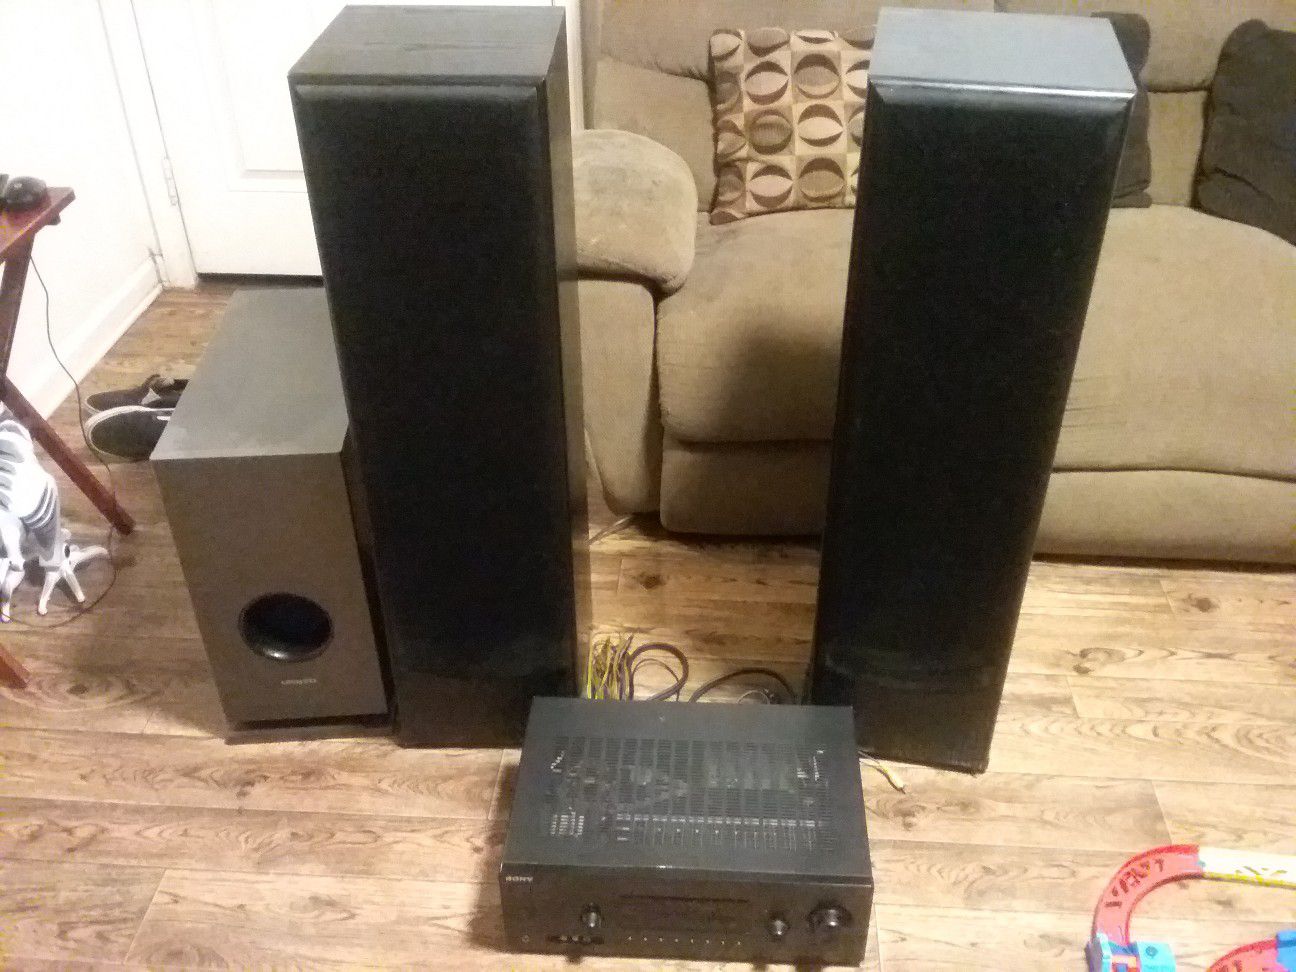 Home theater speakers subwoofer and Sony receiver